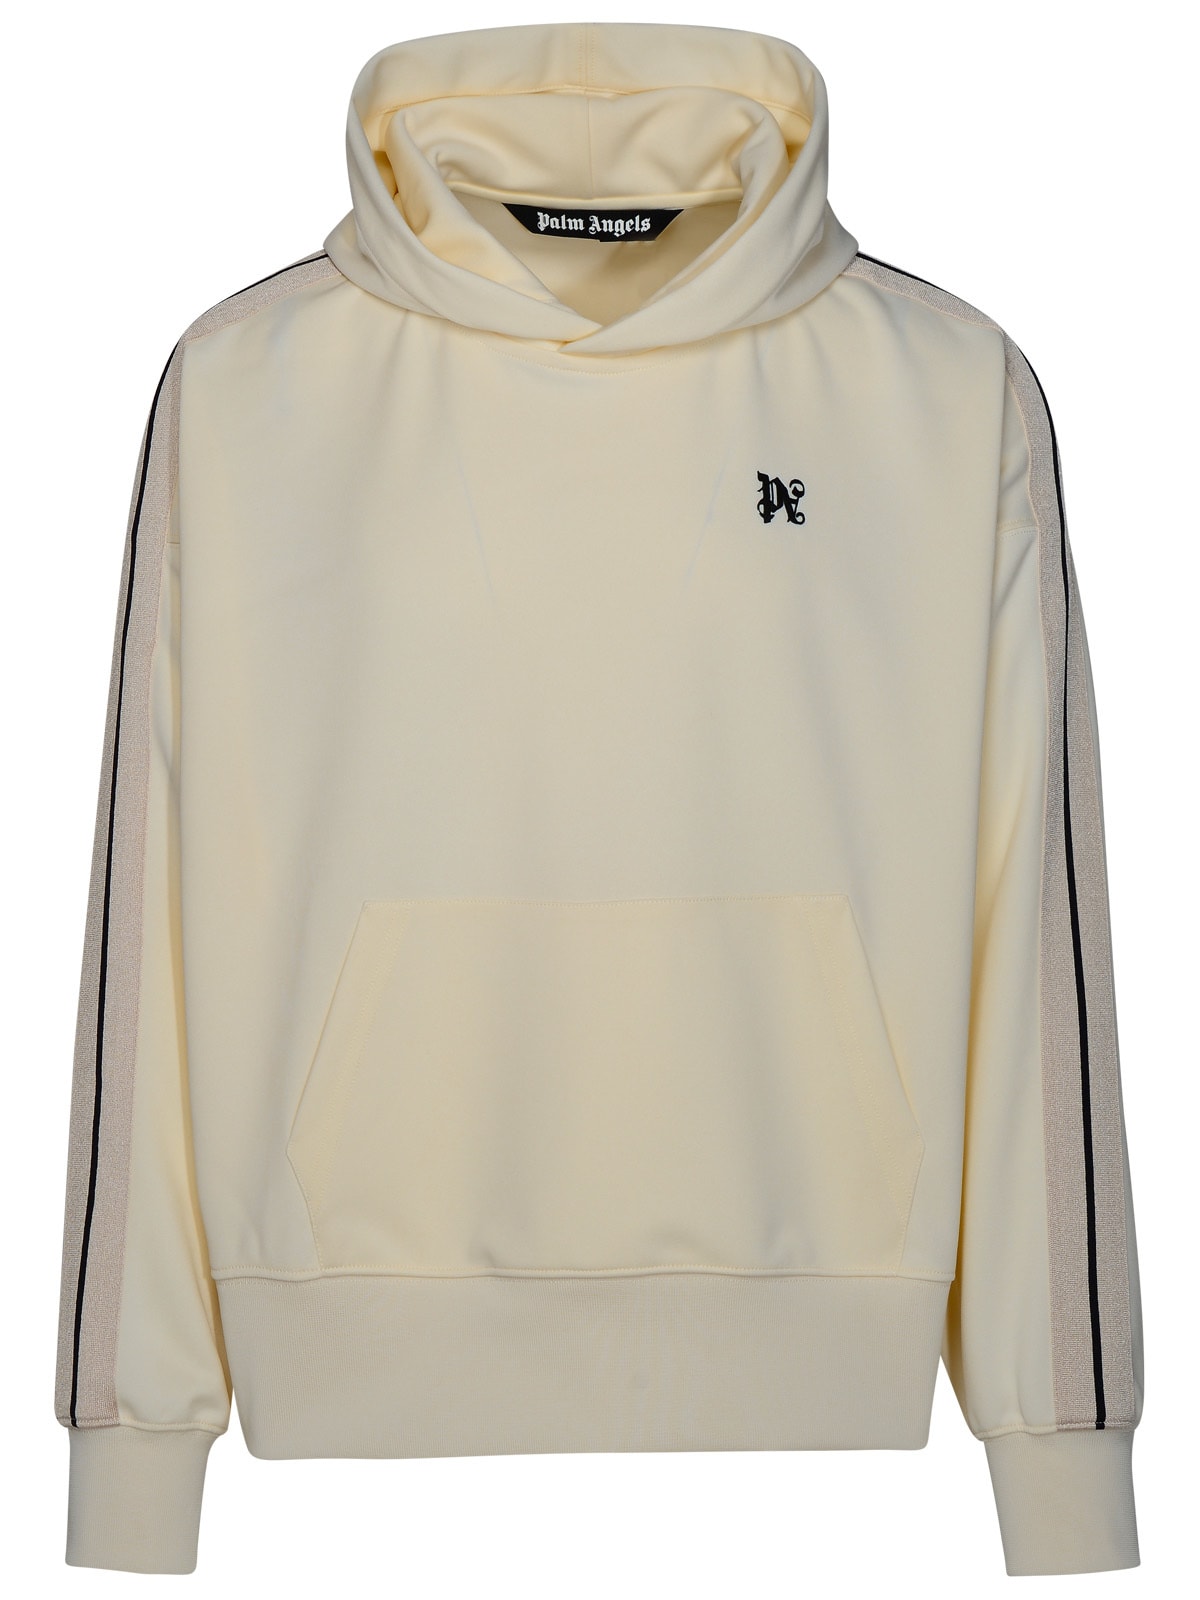 SPORT HOODIE in white - Palm Angels® Official